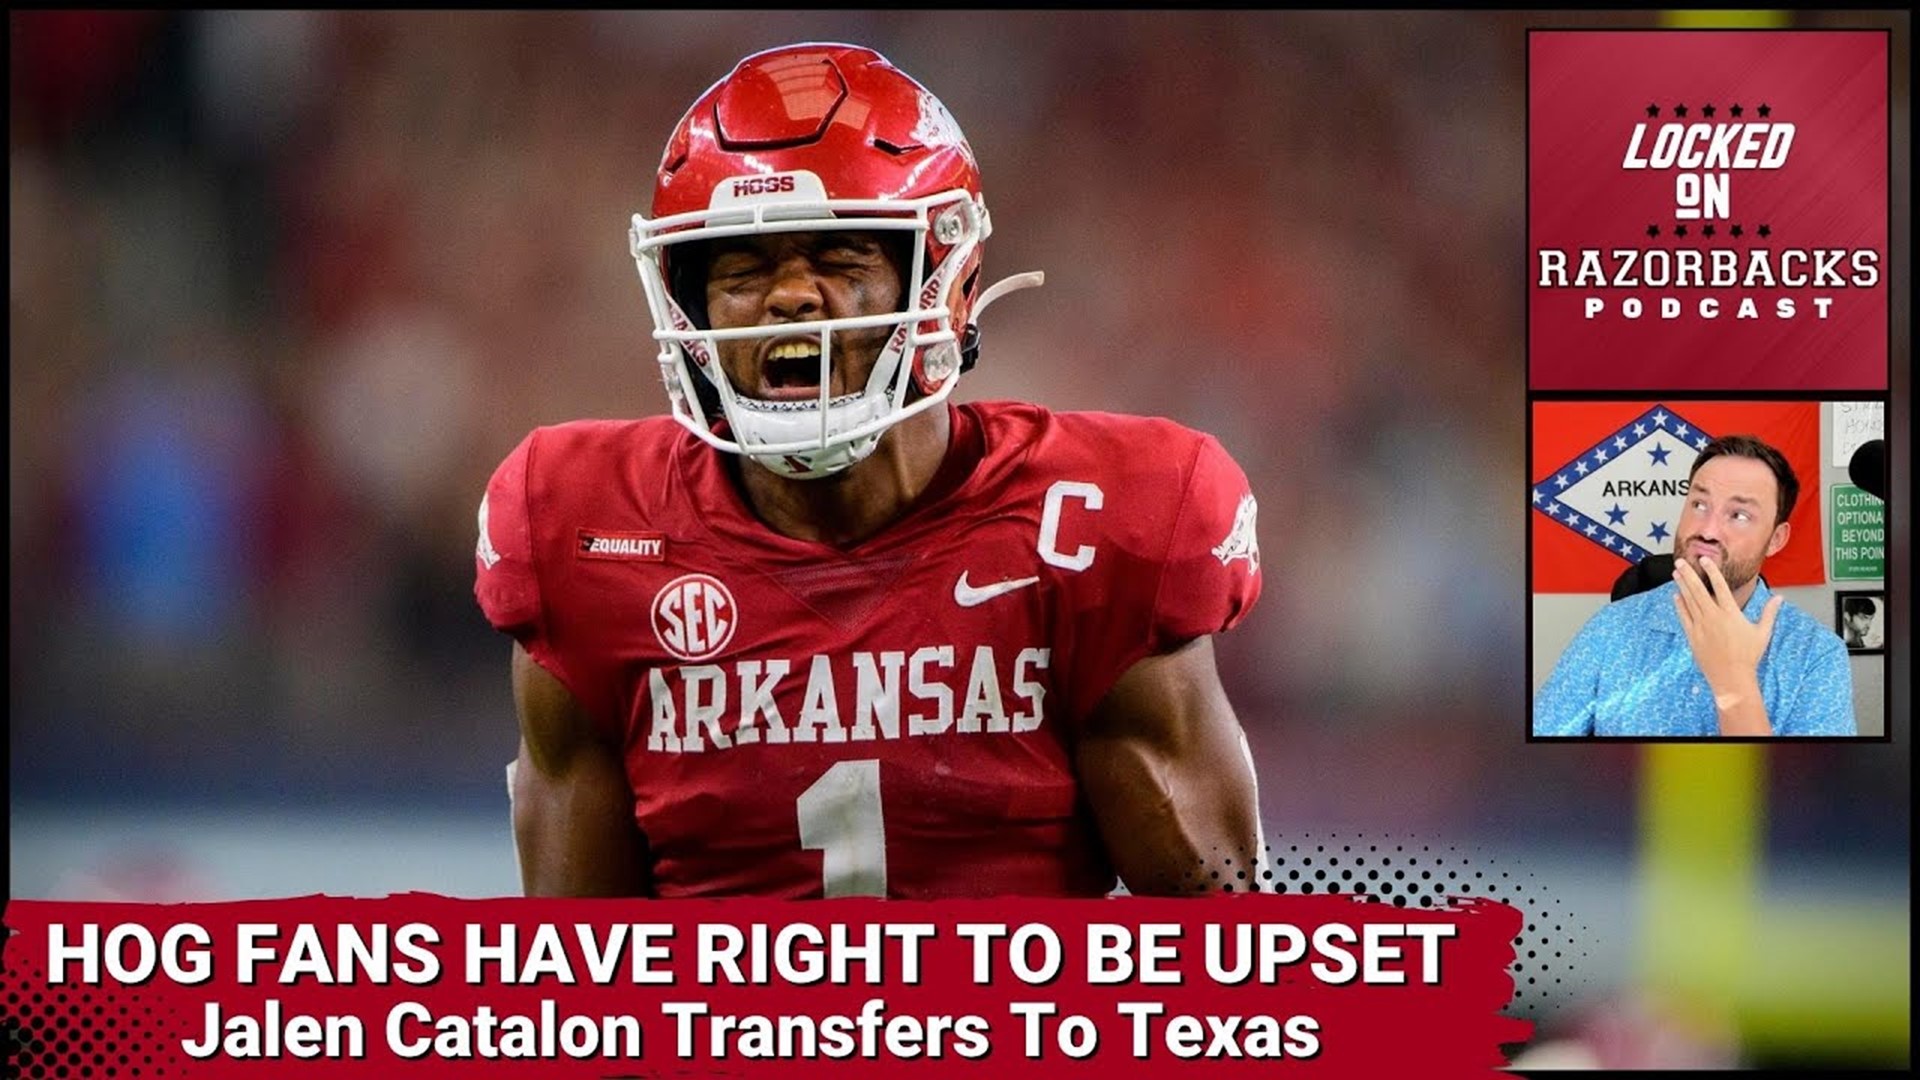 John Nabors discusses former Razorback Safety Jalen Catalon officially transferring to bitter rival Texas and why Razorback fans have a right to be upset.